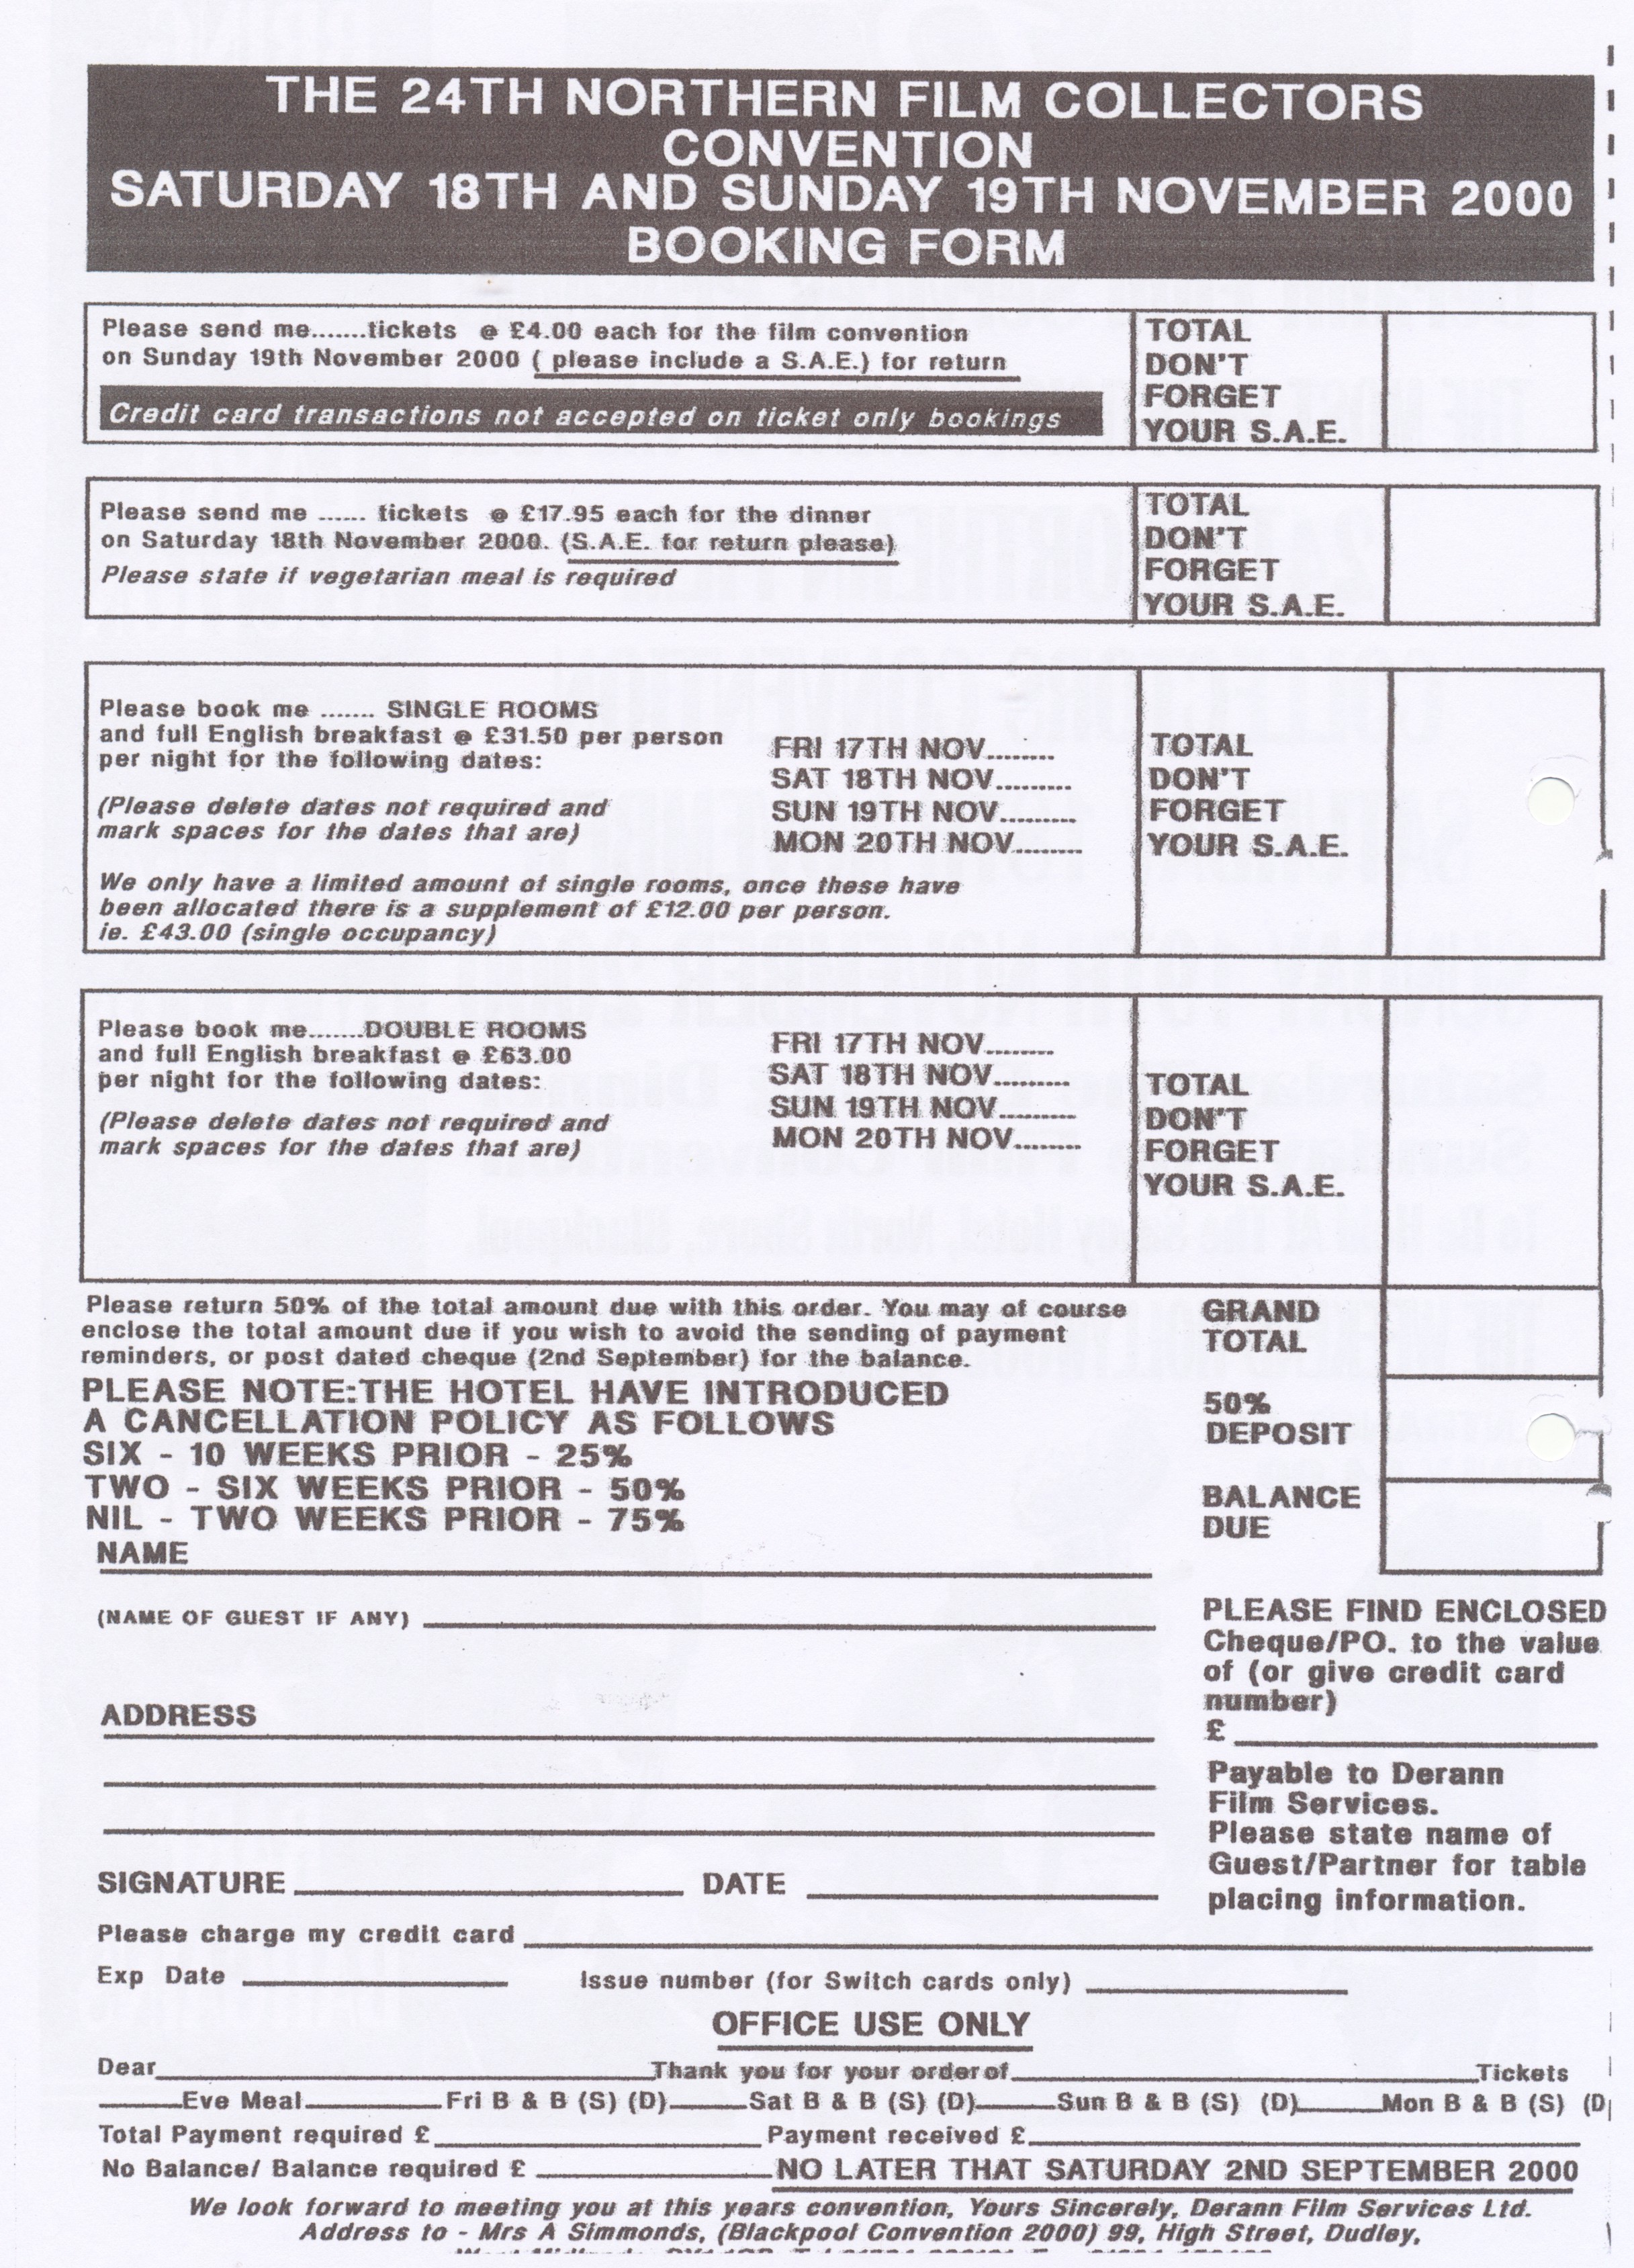 2000 Convention booking form